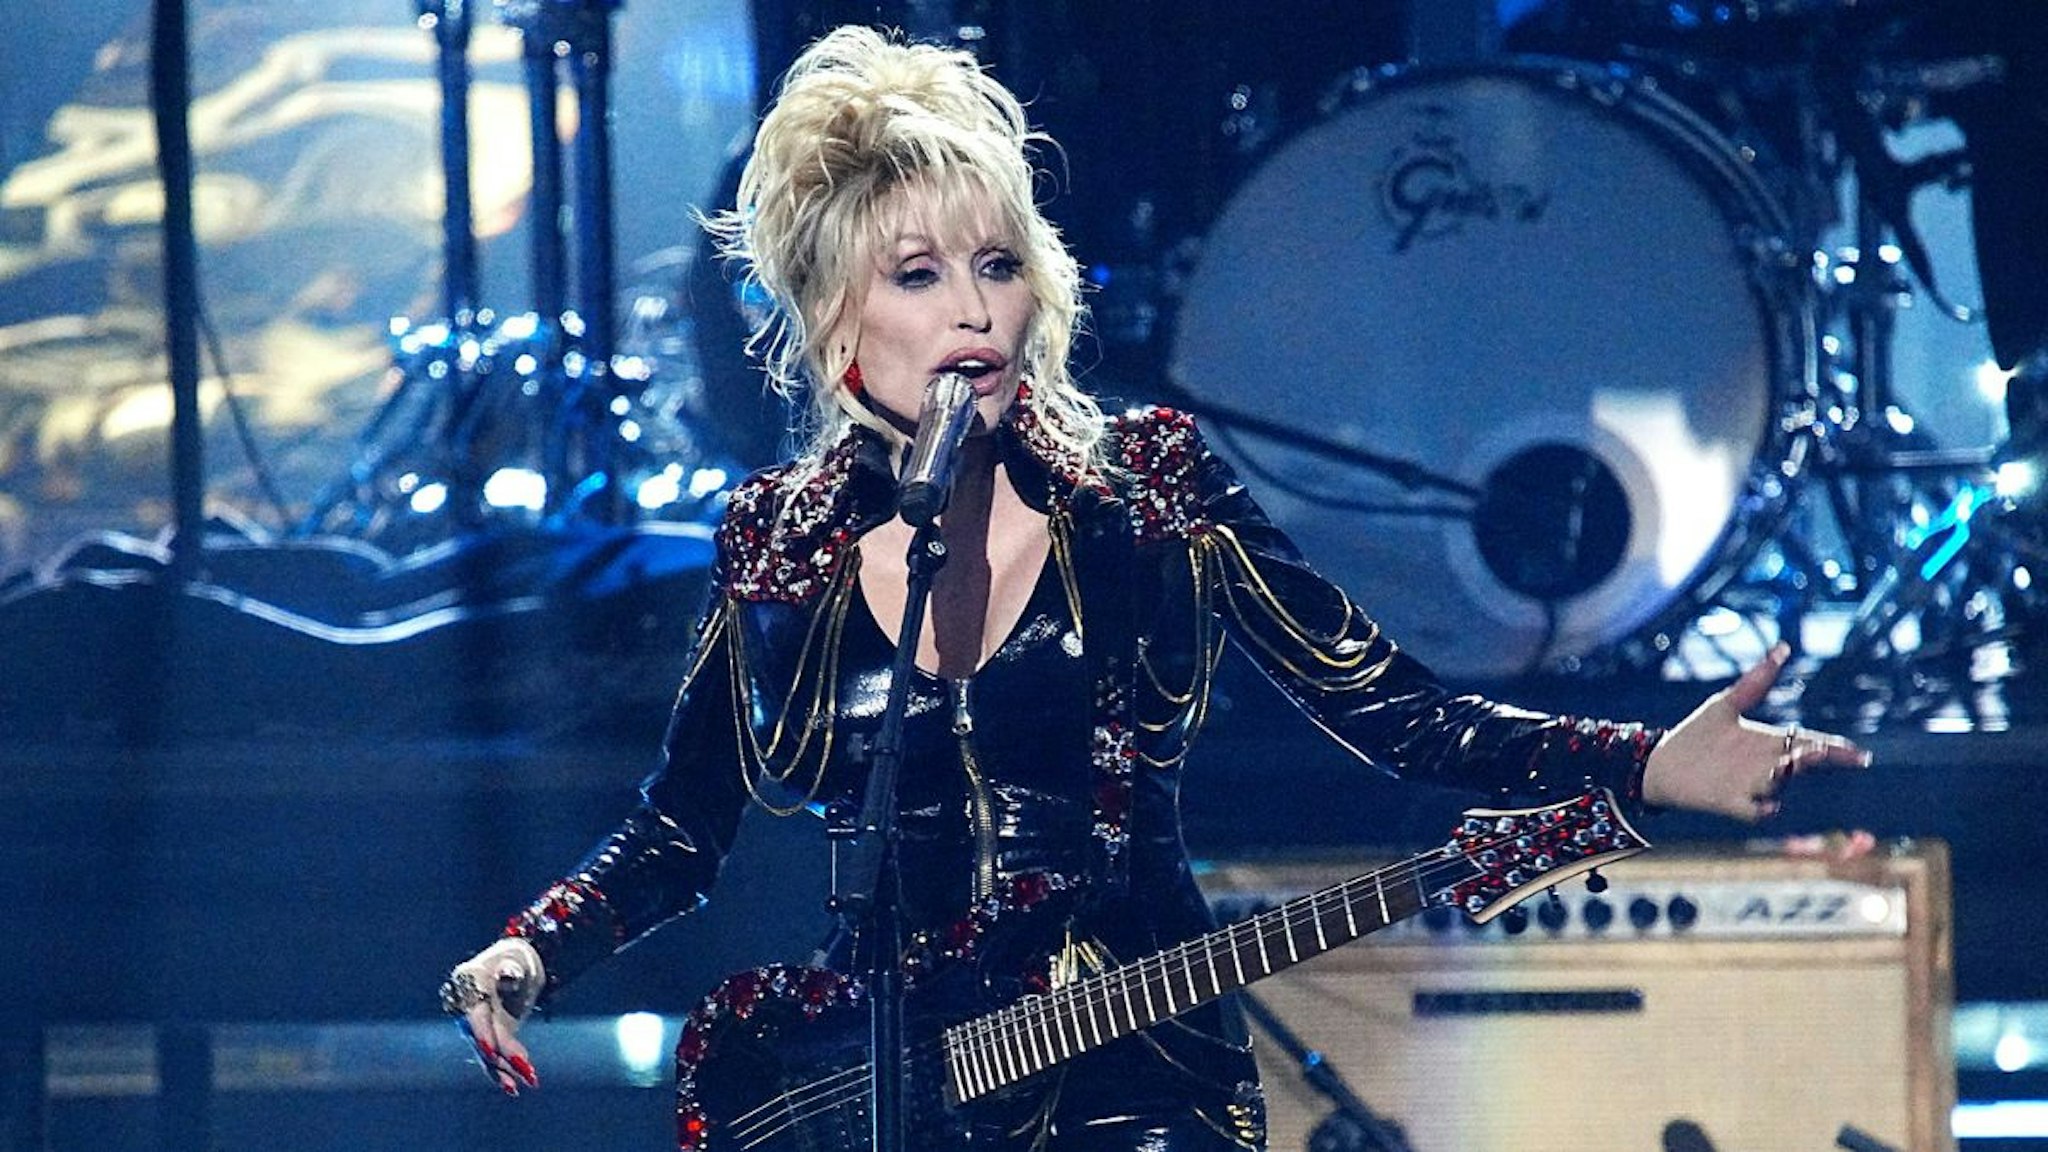 Inductee Dolly Parton performs on stage during the 37th Annual Rock & Roll Hall Of Fame Induction Ceremony at Microsoft Theater on November 05, 2022 in Los Angeles, California.